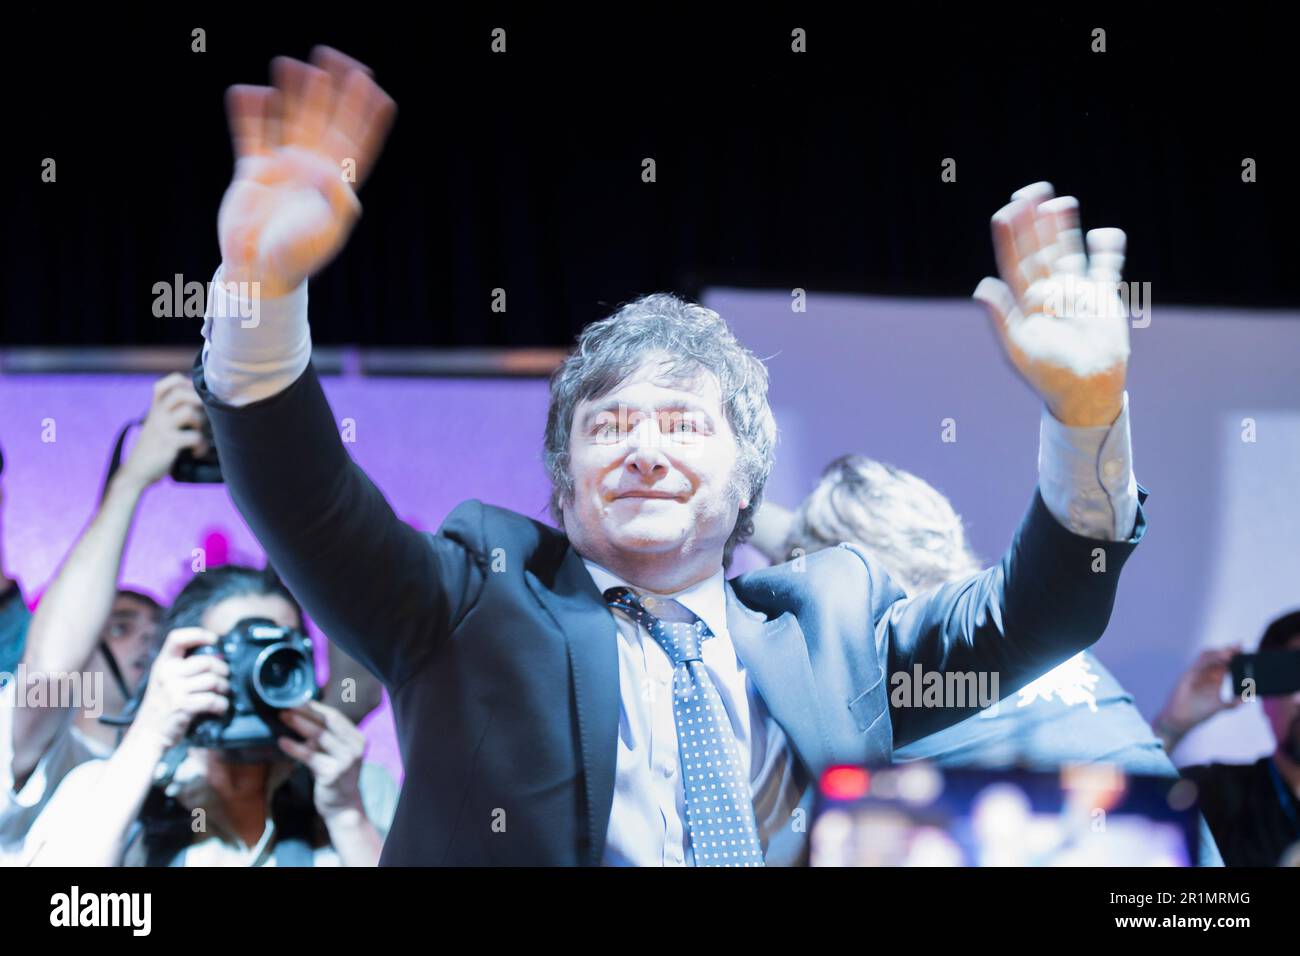 Buenos Aires, Argentina. 14th May 2023. Presidential candidate Javier Milei presented his book El fin de la inflación (The End of Inflation) at the 47th International Book Fair. (Credit: Esteban Osorio/Alamy Live News) Stock Photo